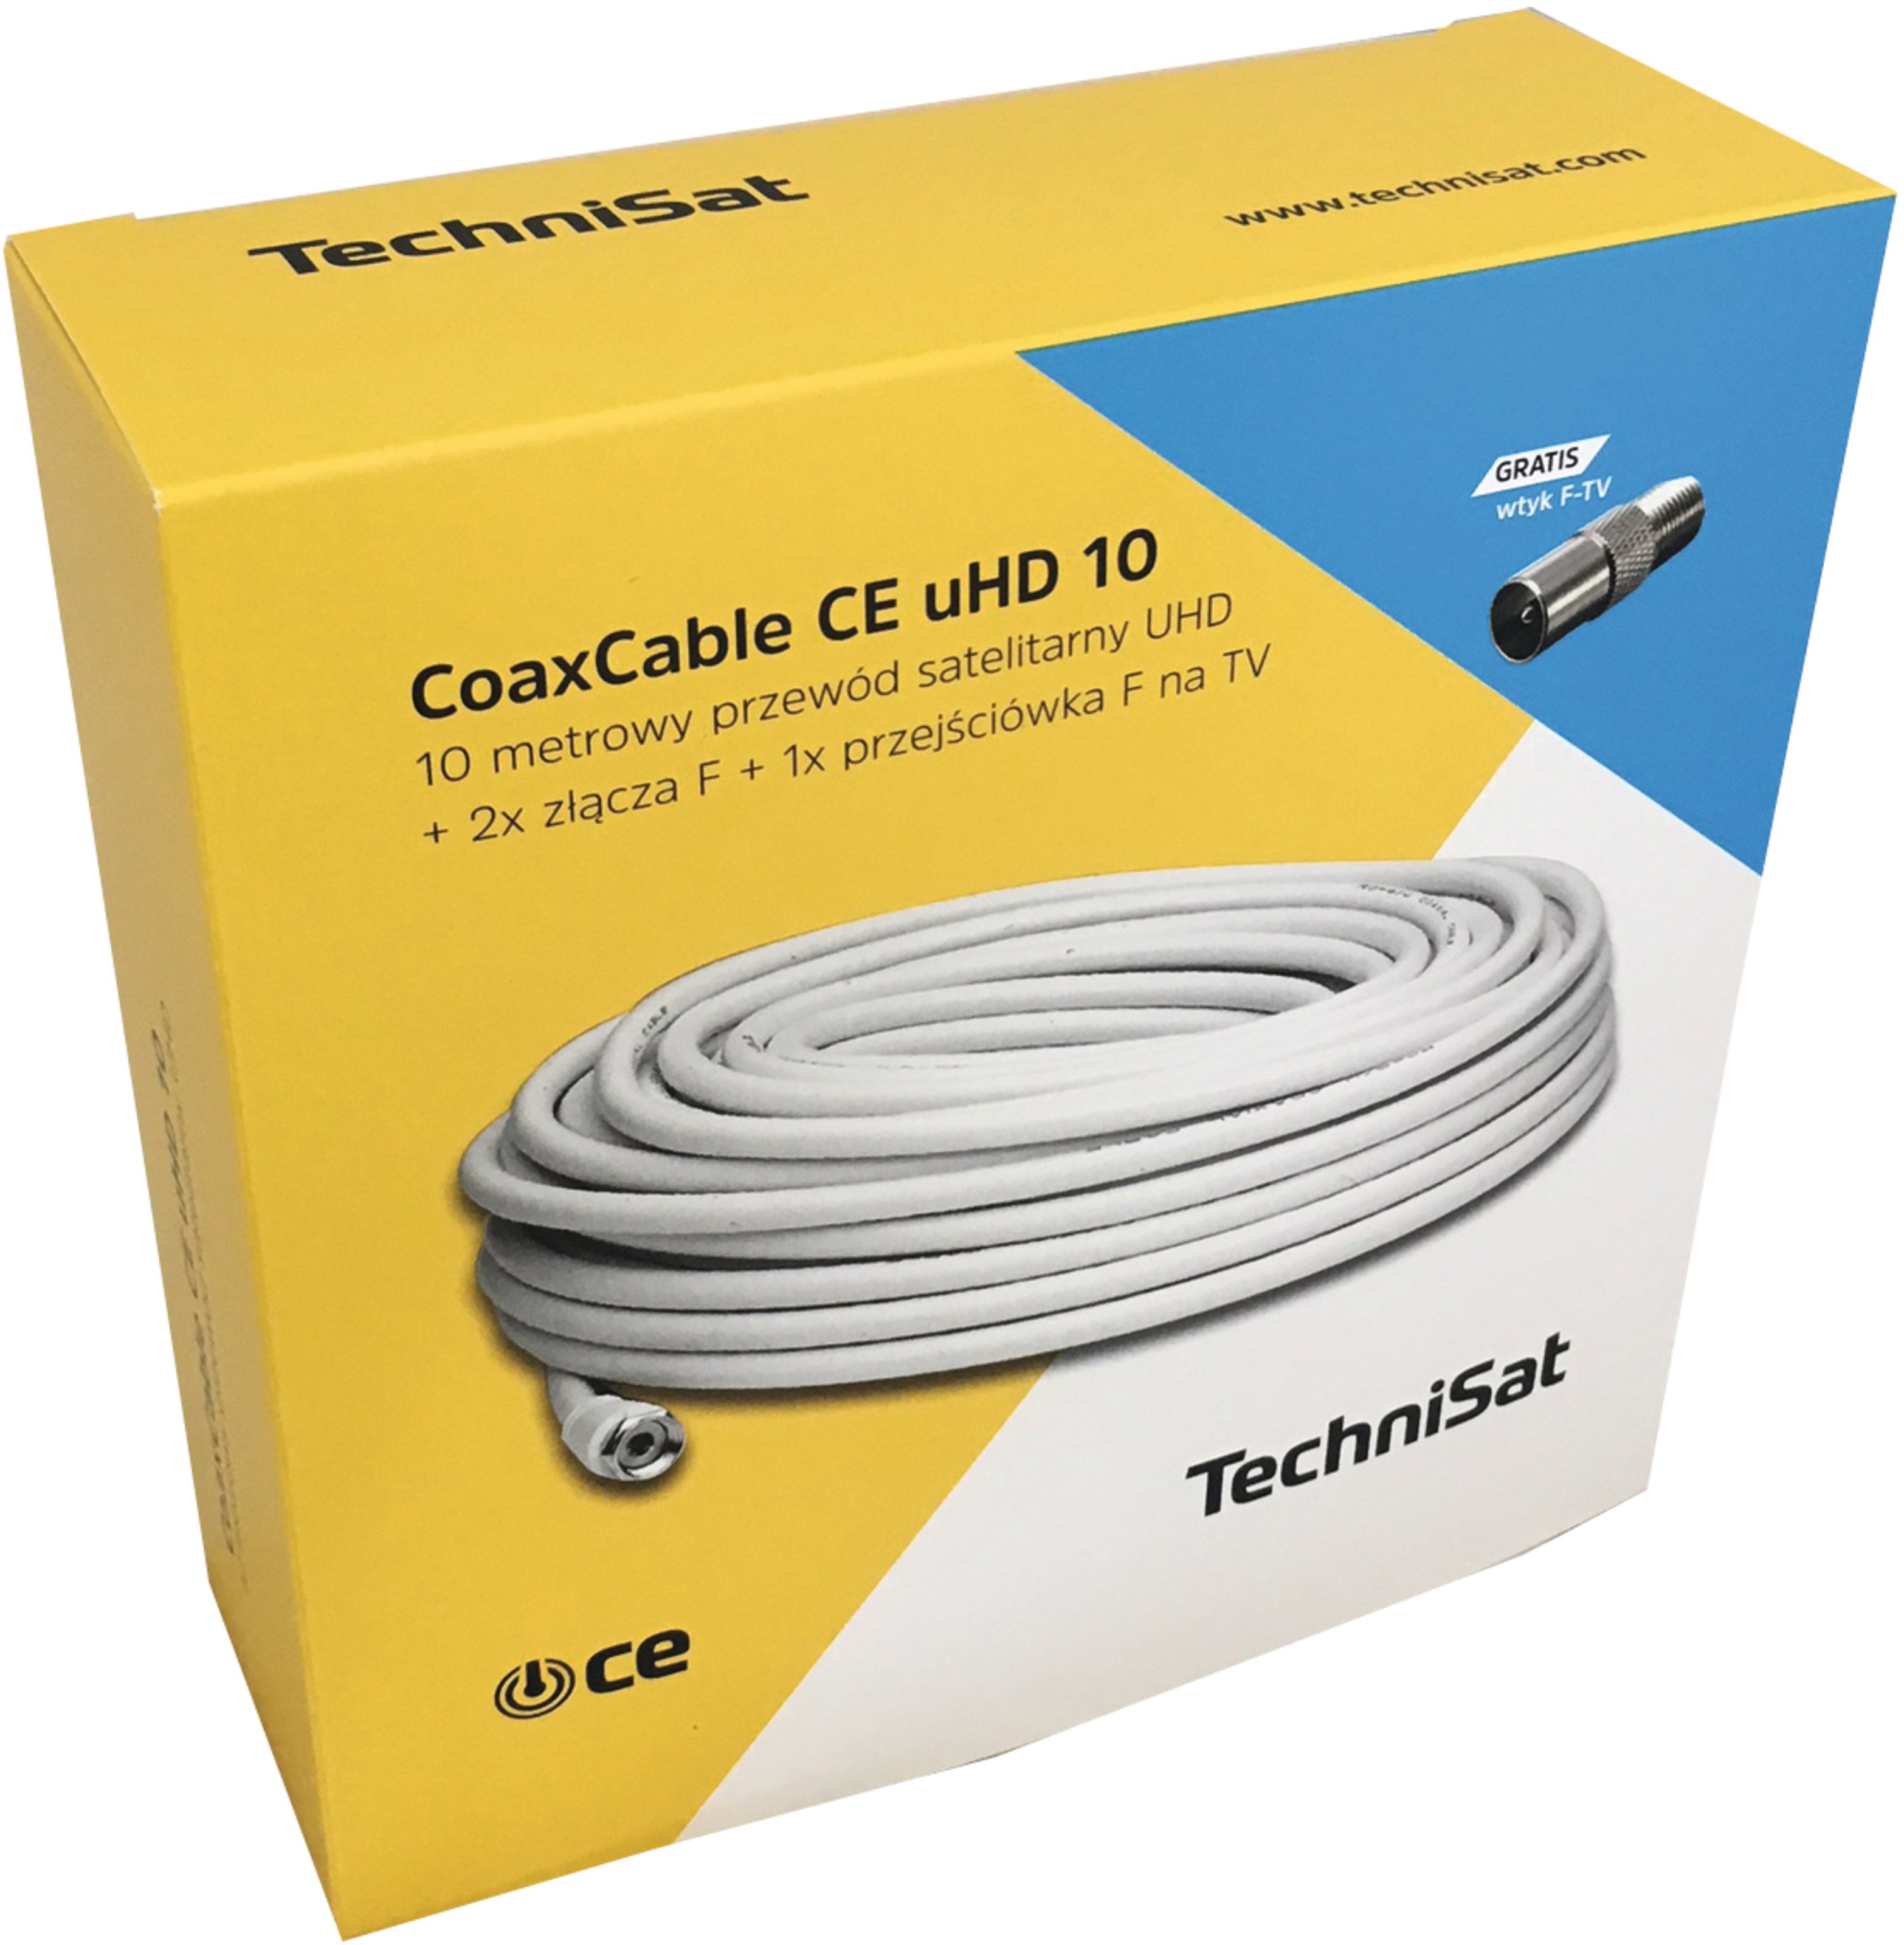 COAXCable CE uHD 10